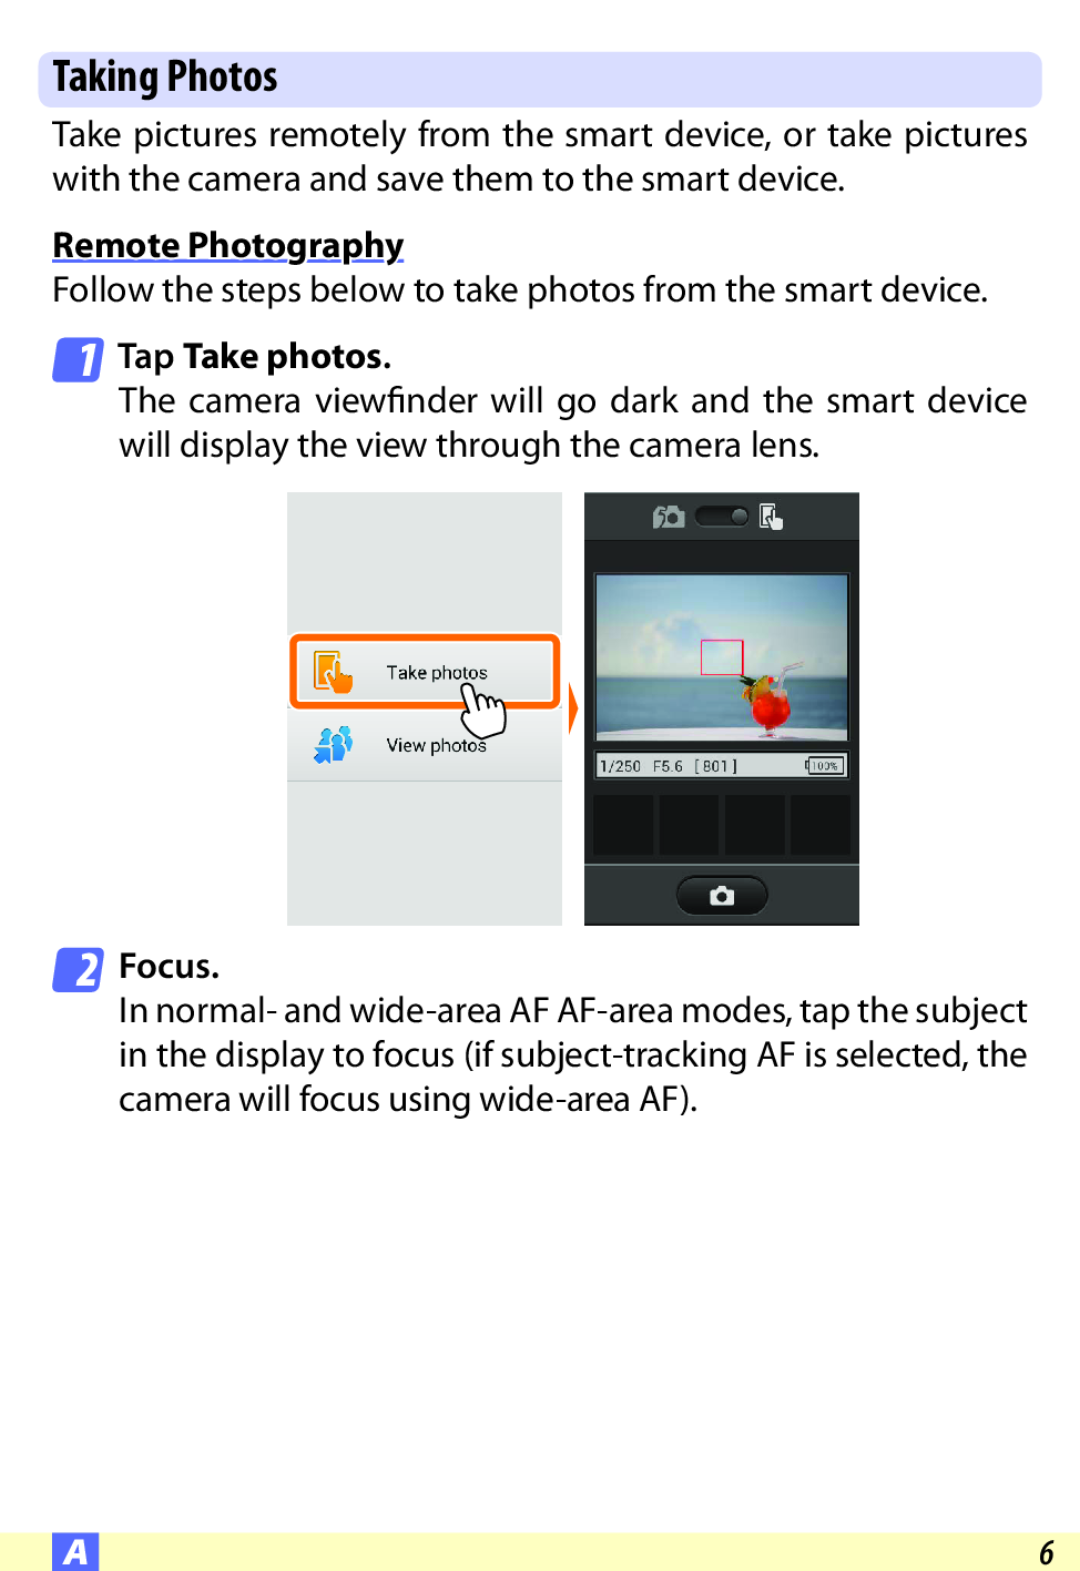 Nikon D600 Taking Photos, Remote Photography, Follow the steps below to take photos from the smart device, Tap Take photos 